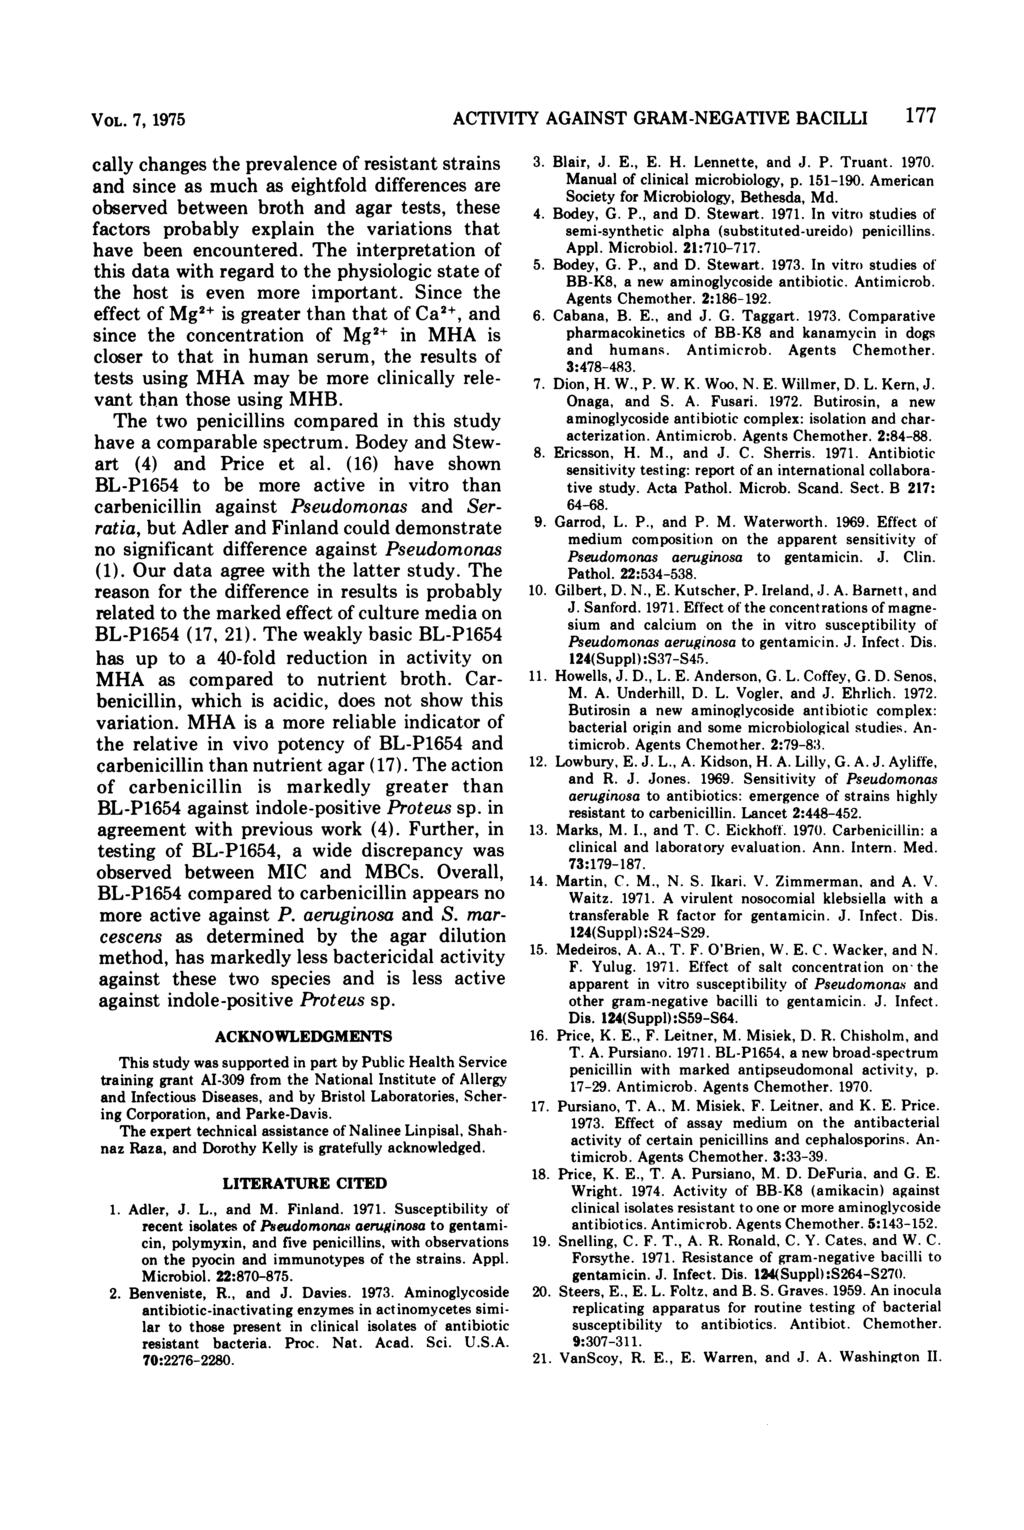 VOL. 7, 1975 cally changes the prevalence of resistant strains and since as much as eightfold differences are observed between broth and agar tests, these factors probably explain the variations that